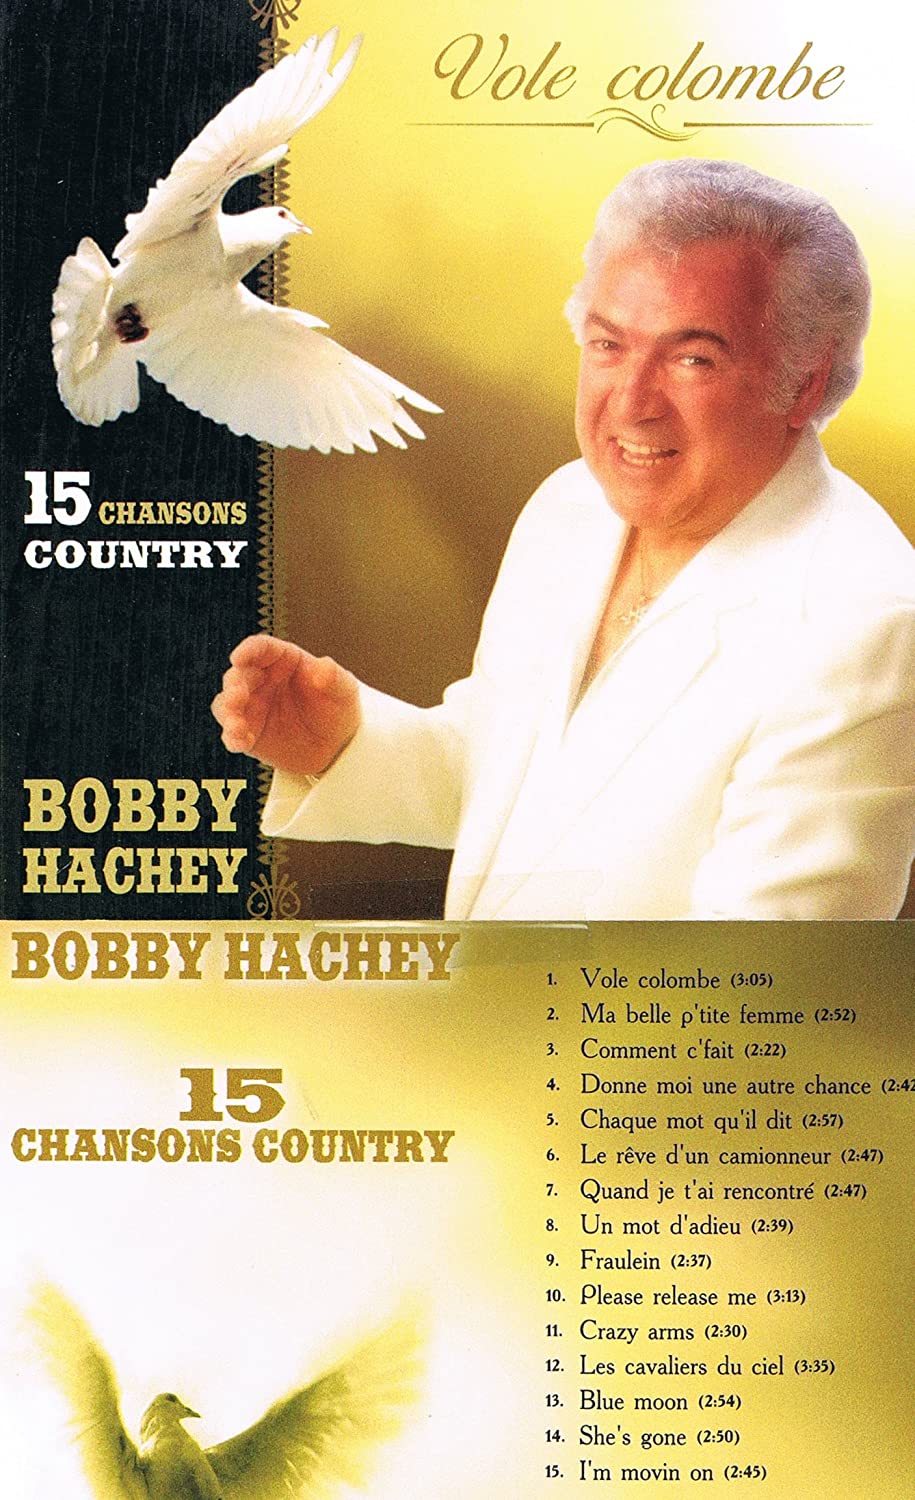 VOLE COLOMBE (15 Chansons Country) [Audio CD] Bobby Hachey